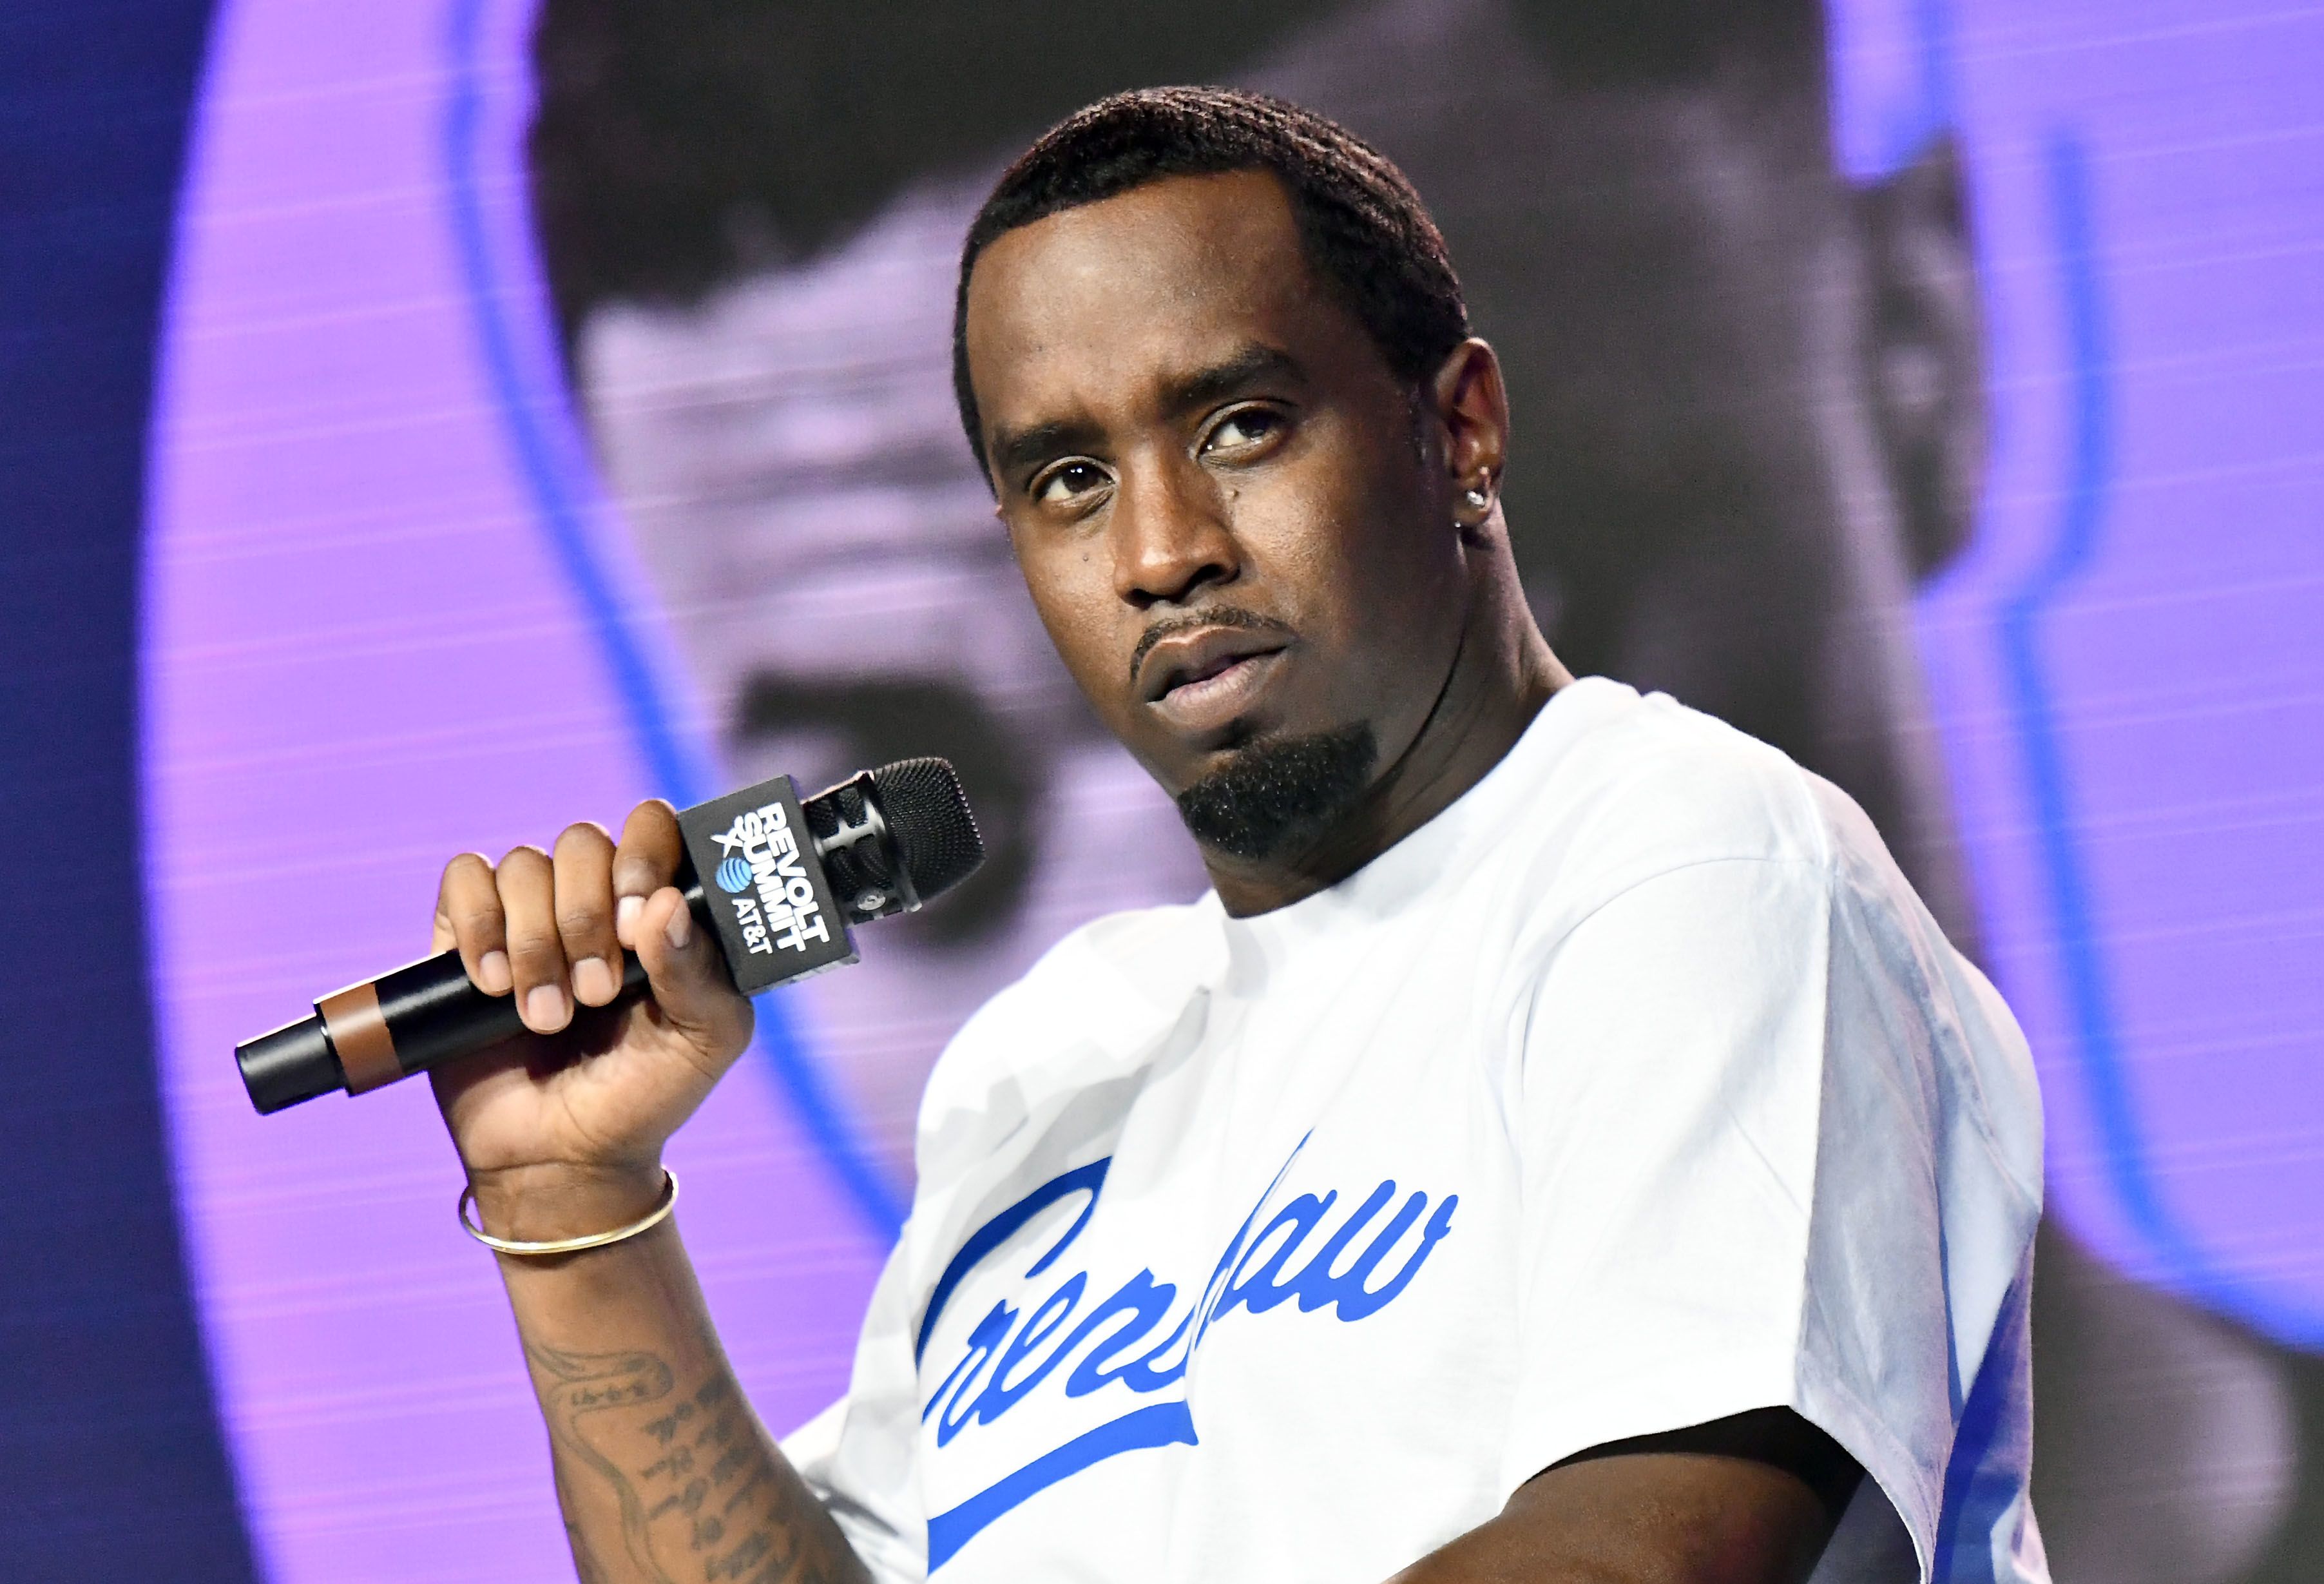 Why Diddy Changed His Name from Puff Daddy